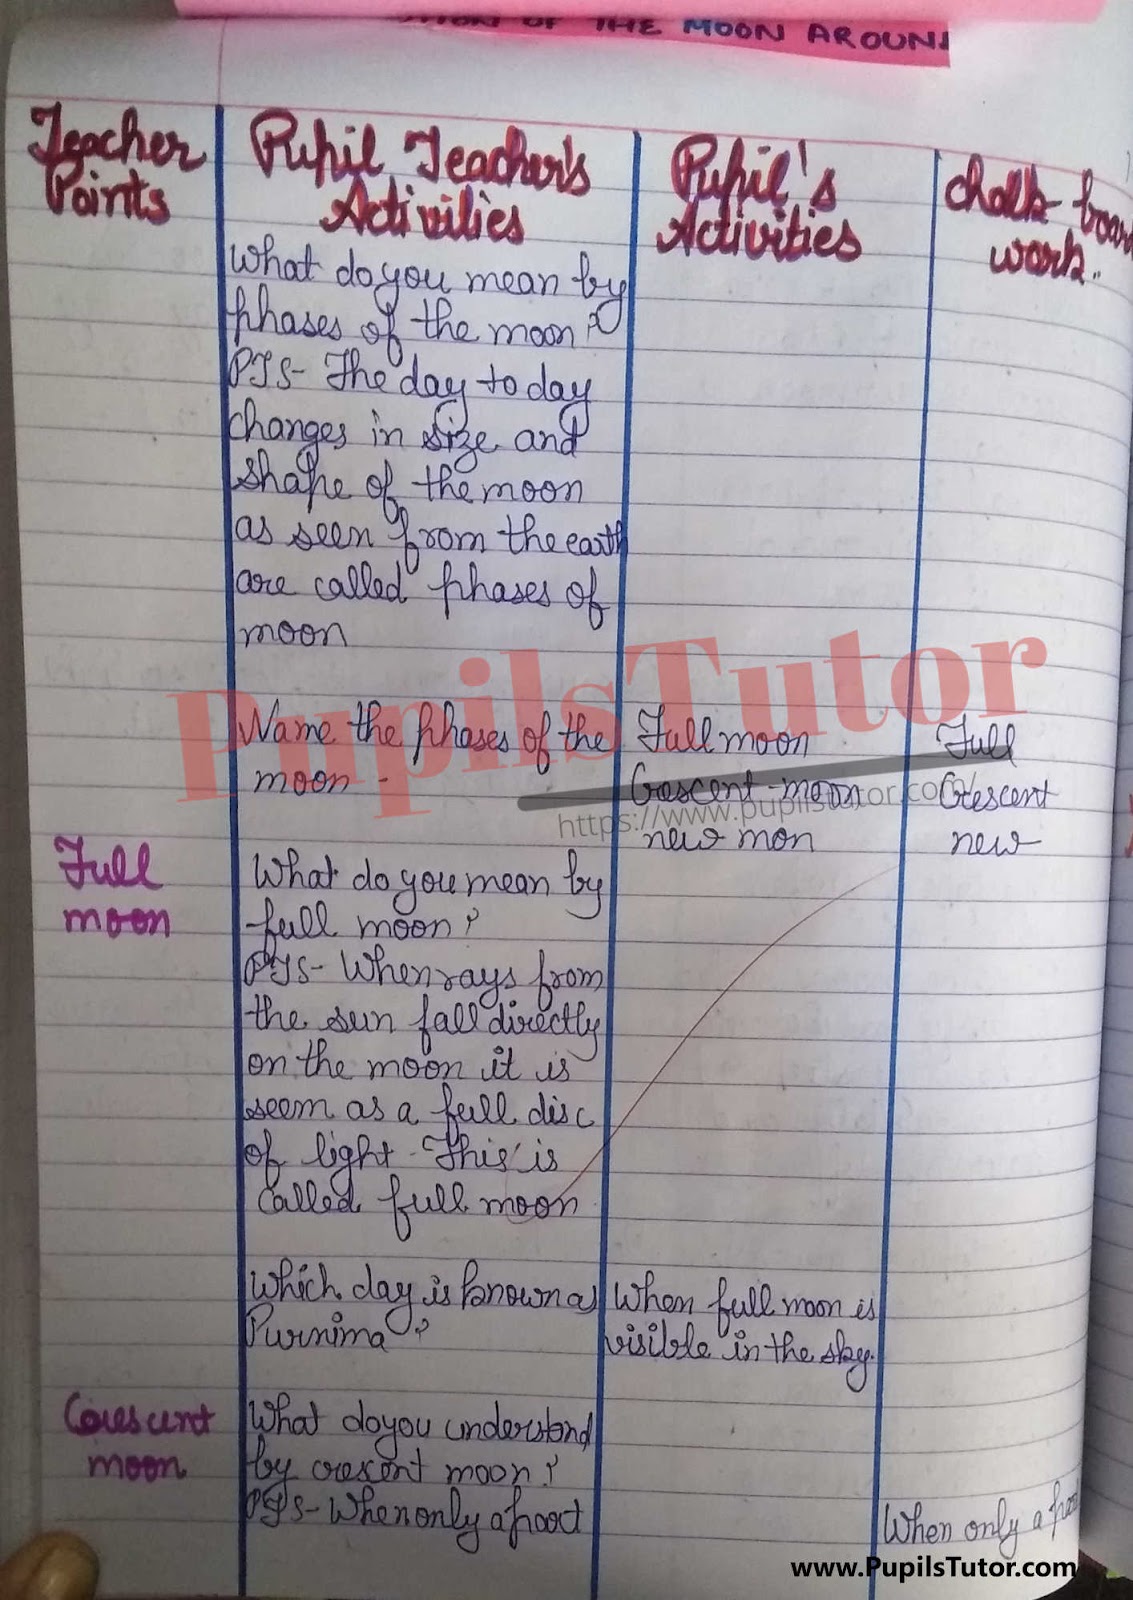 BED, DELED, BELED, BA B.Ed Integrated, B.Com B.Ed, BSC BEd, BTC, BSTC, M.ED, DED And NIOS Teaching Of Science Class 4th 5th 6th 7th 8th 9th, 10th, 11th, 12th Digital Lesson Plan Format On Moon Topic – [Page And Pic Number 5] – https://www.pupilstutor.com/